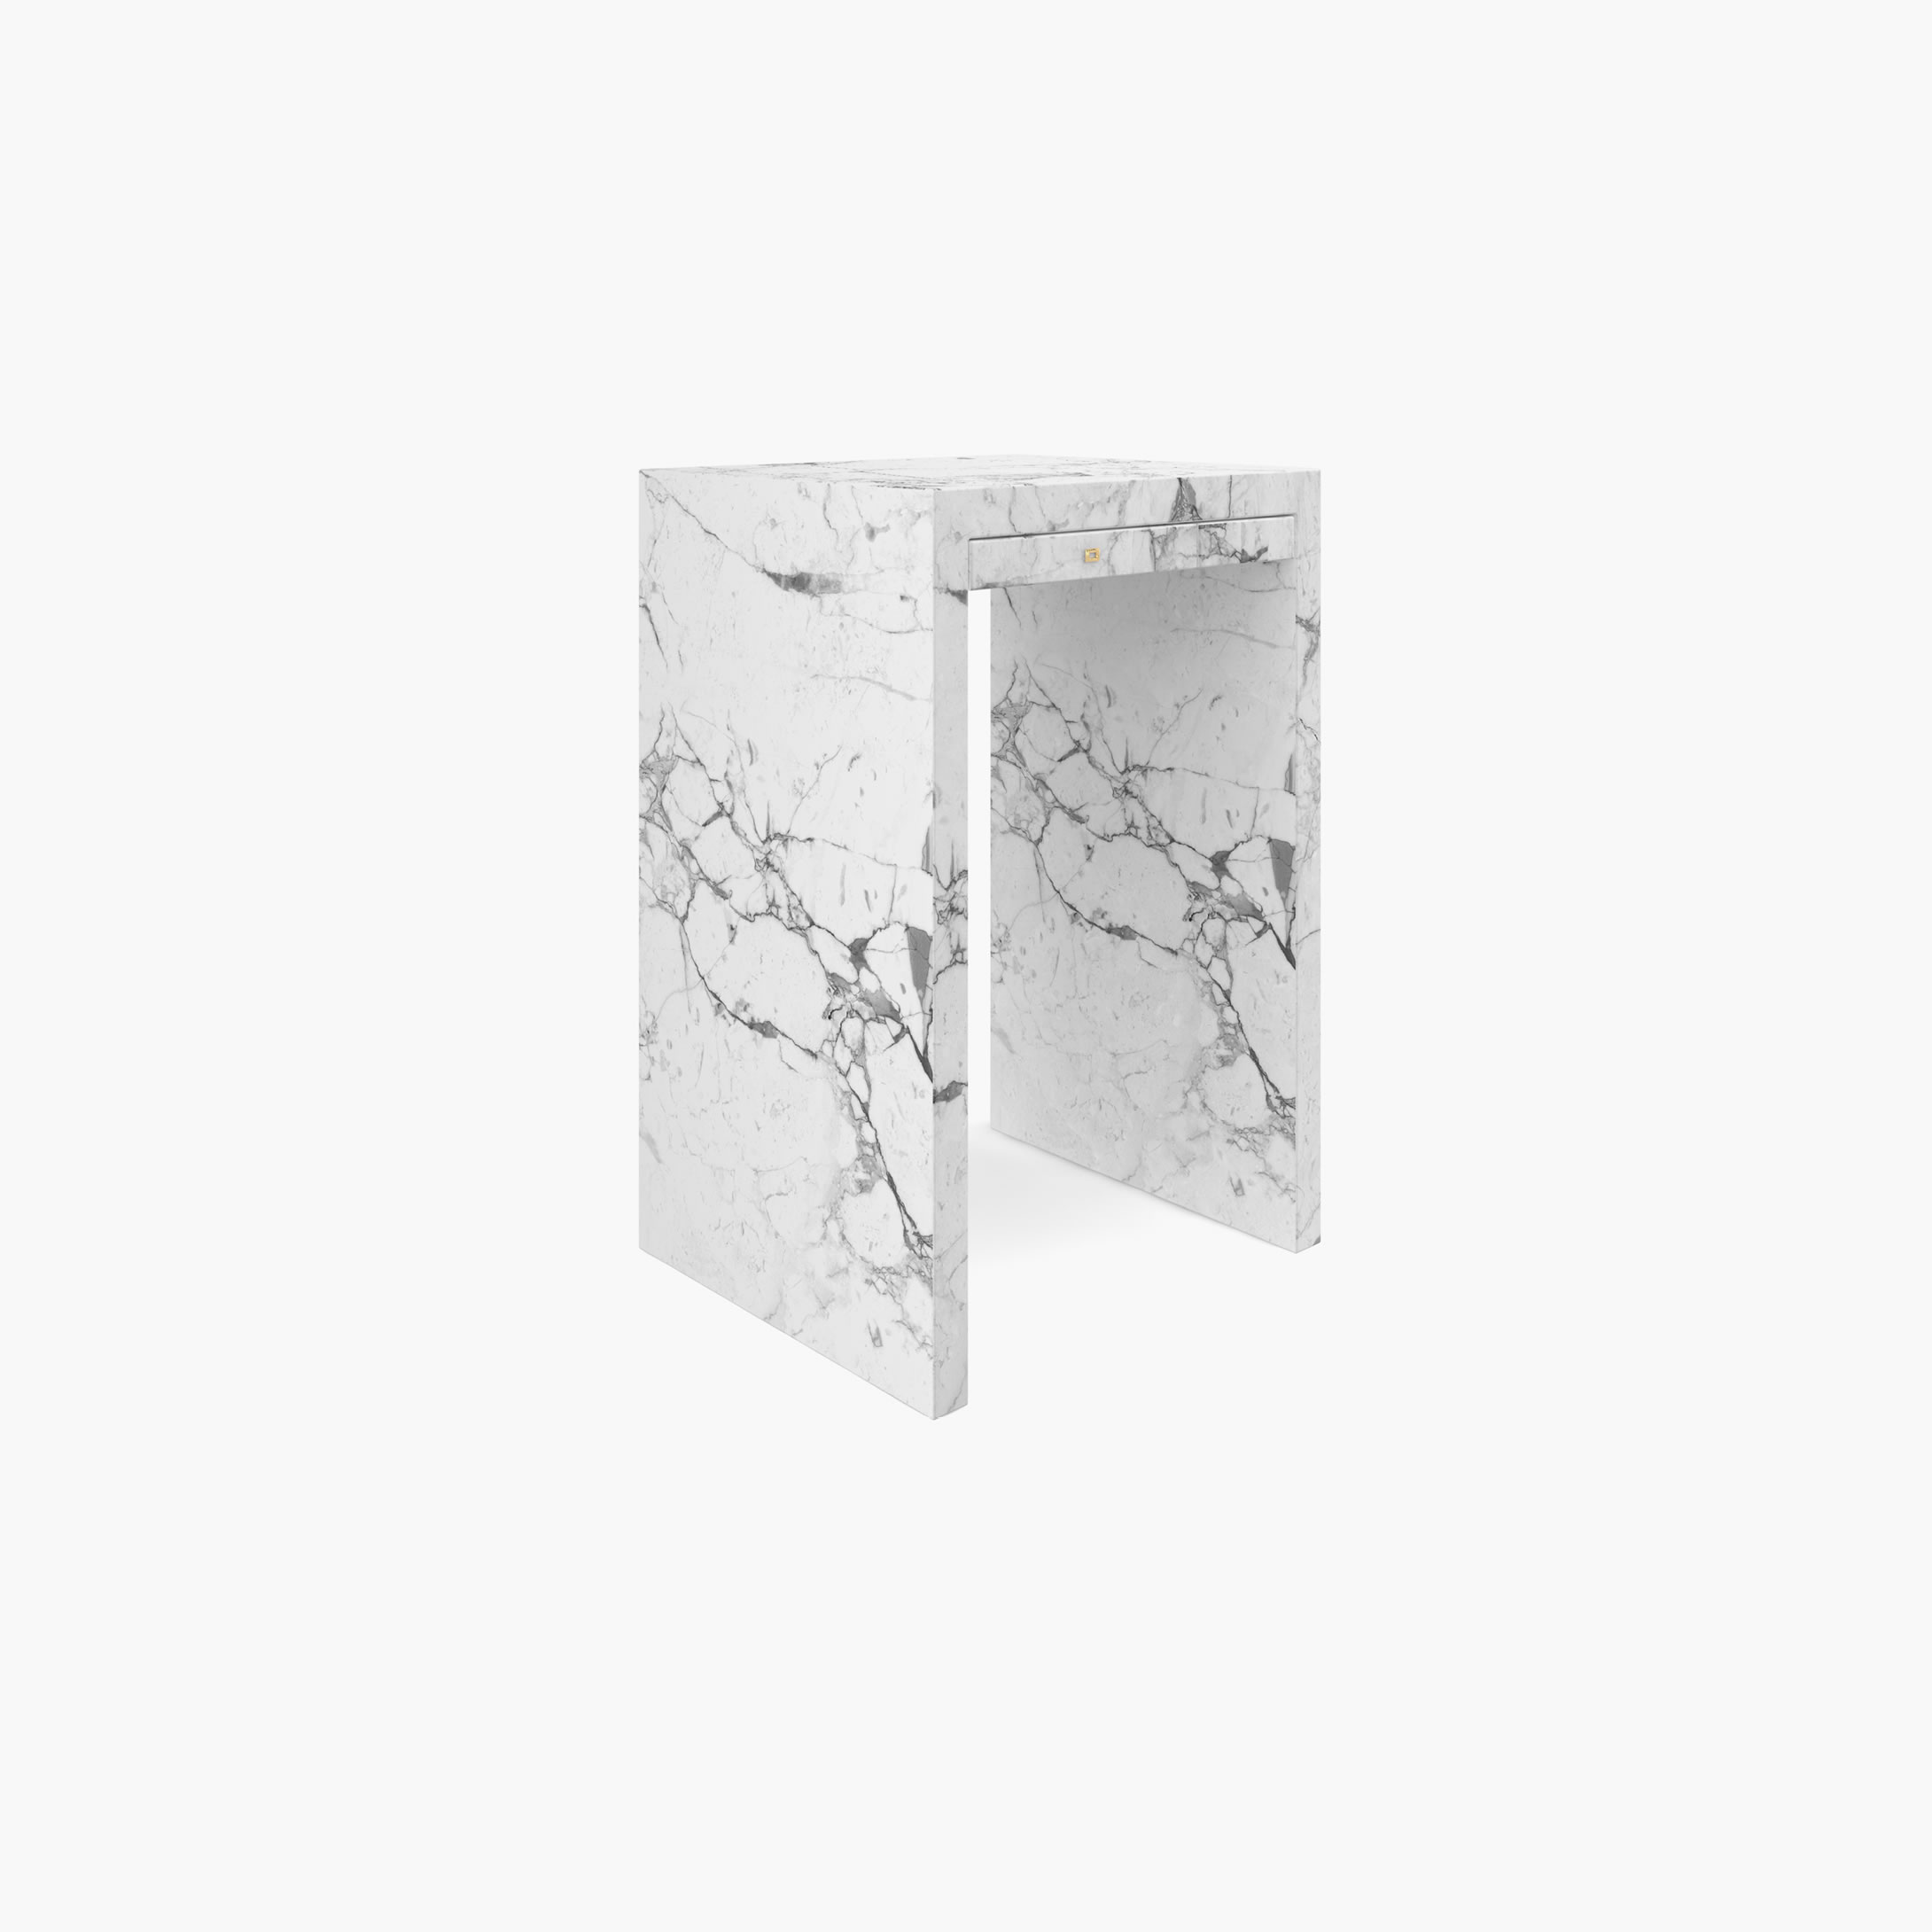 Console drawers White Arabescato Marble collectible Living Room designs Consoles  Sideboards FS 29 FELIX SCHWAKE